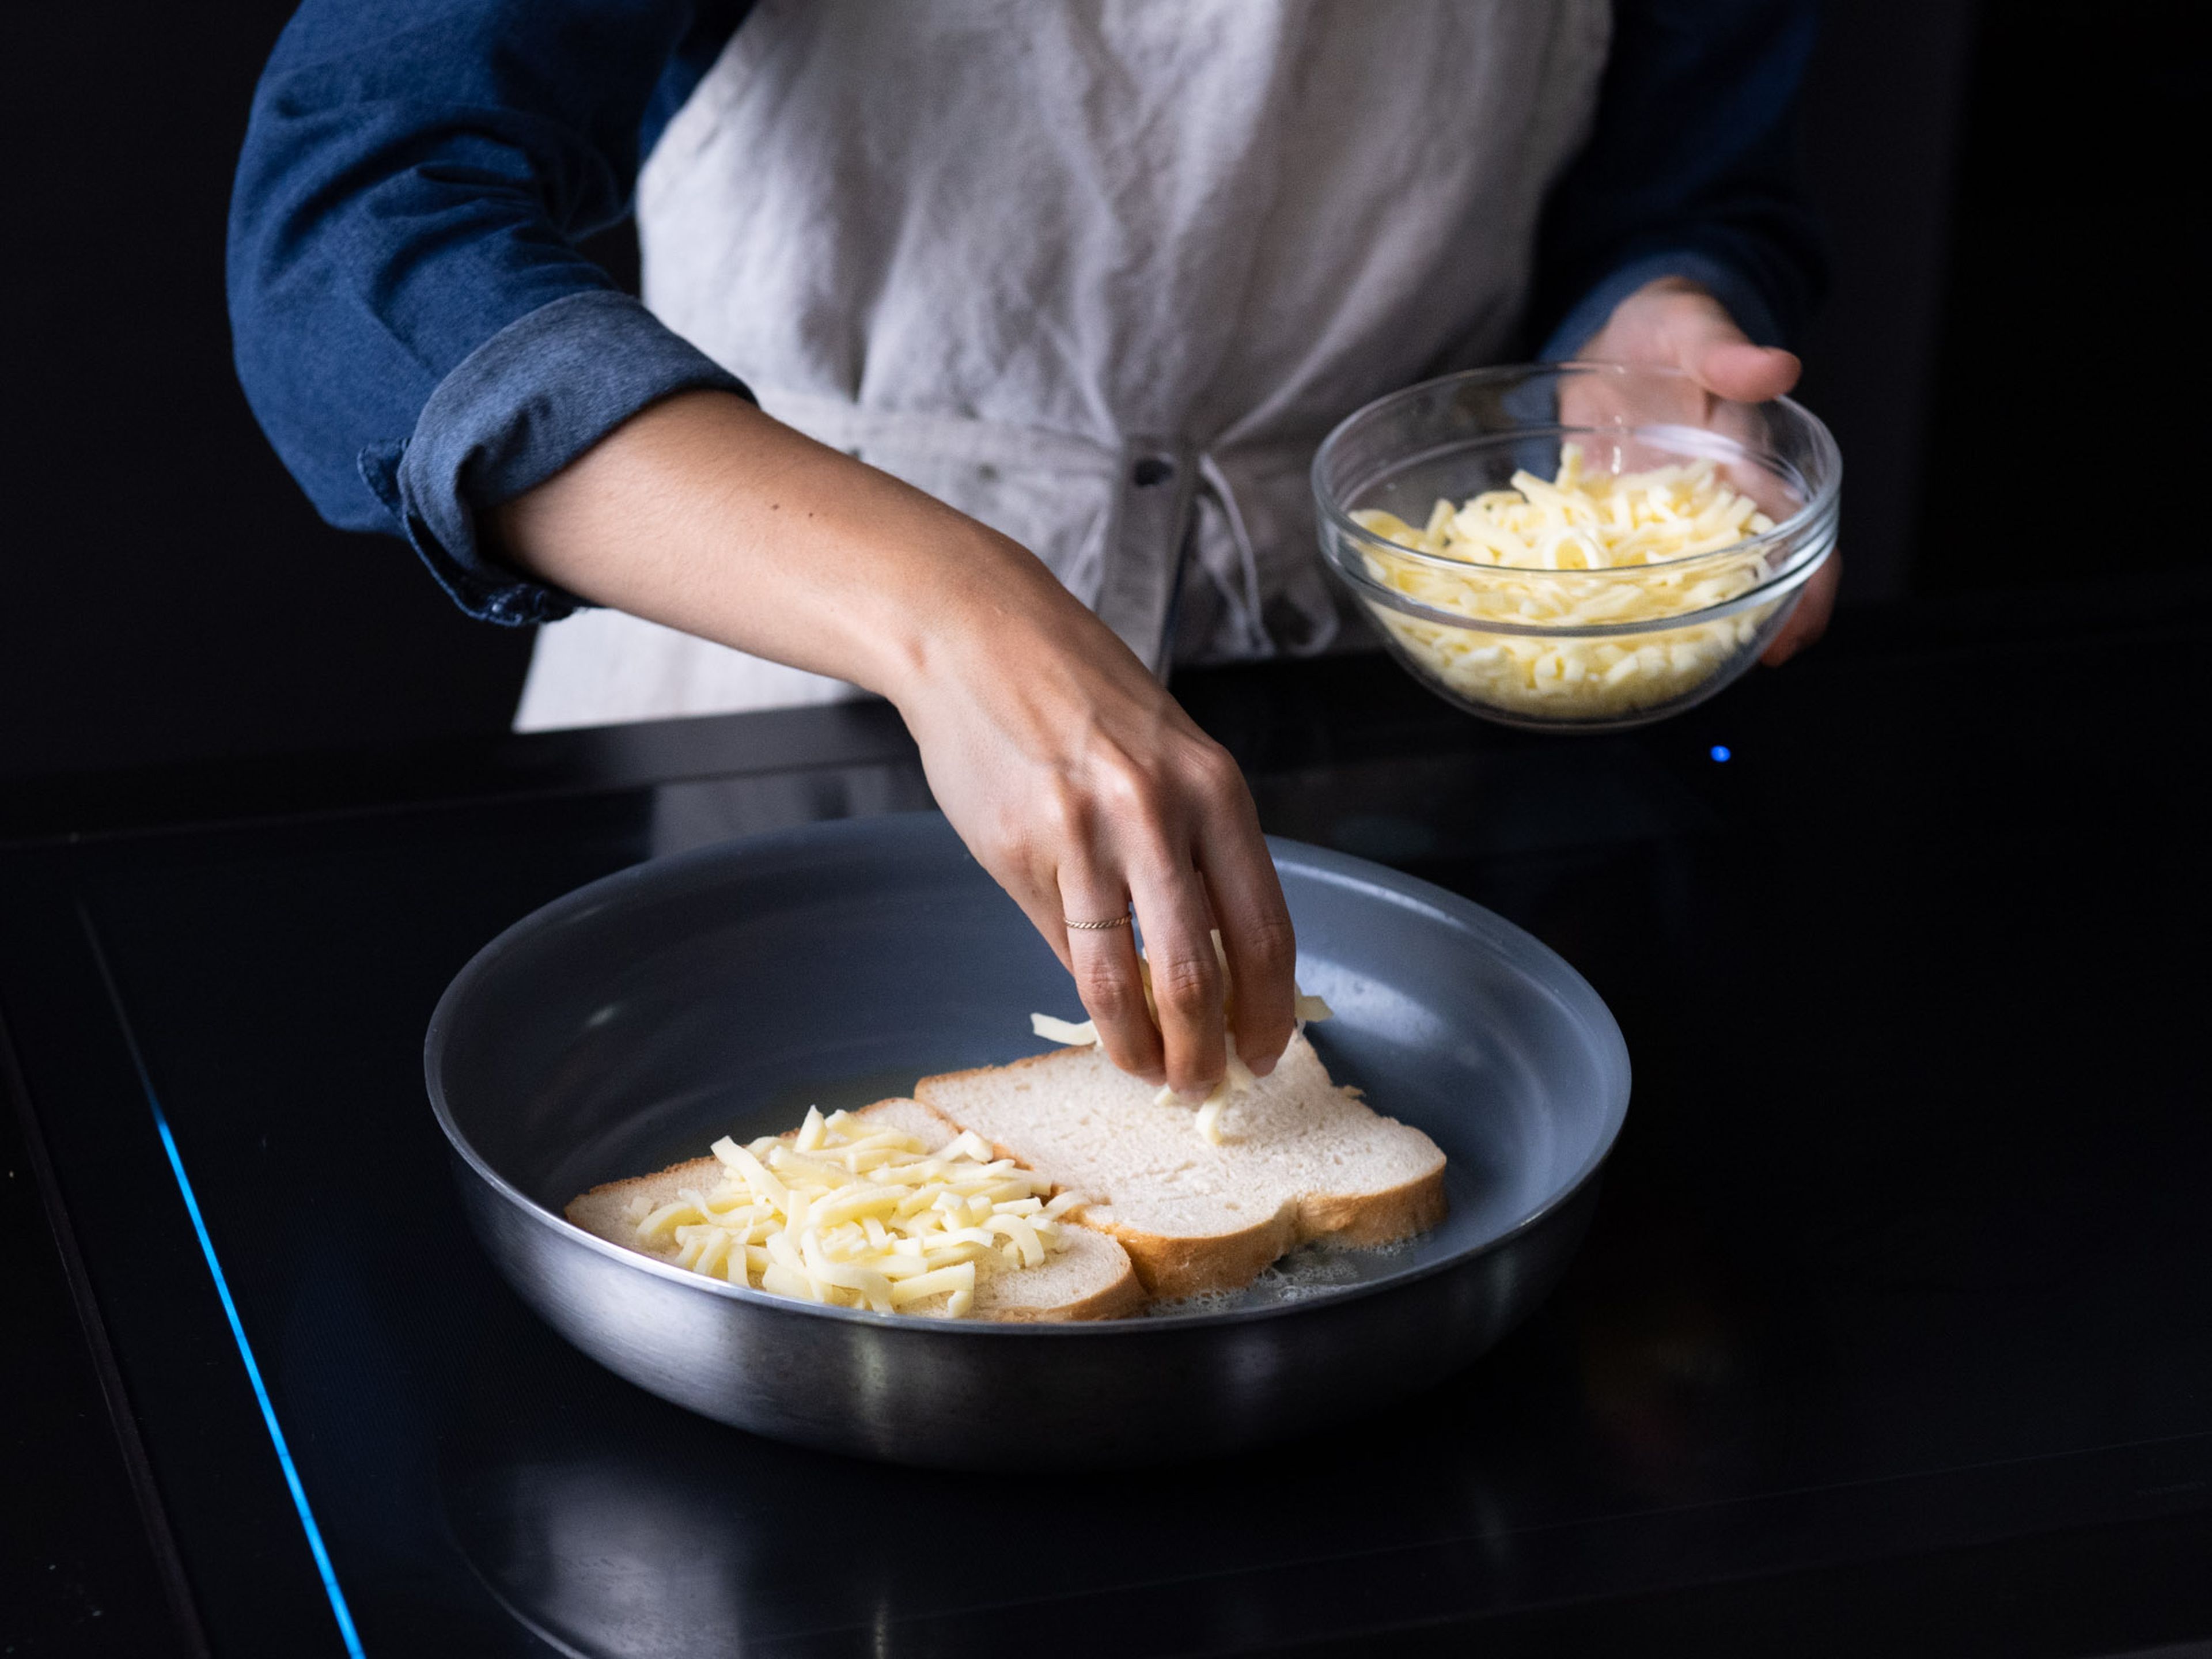 Add some butter and olive oil to a frying pan over medium heat. Once melted, add two slices of bread to the pan and wiggle around a bit to ensure even coverage of the bread in the melted butter and olive oil. Top each slice with a quarter of the shredded mozzarella cheese.